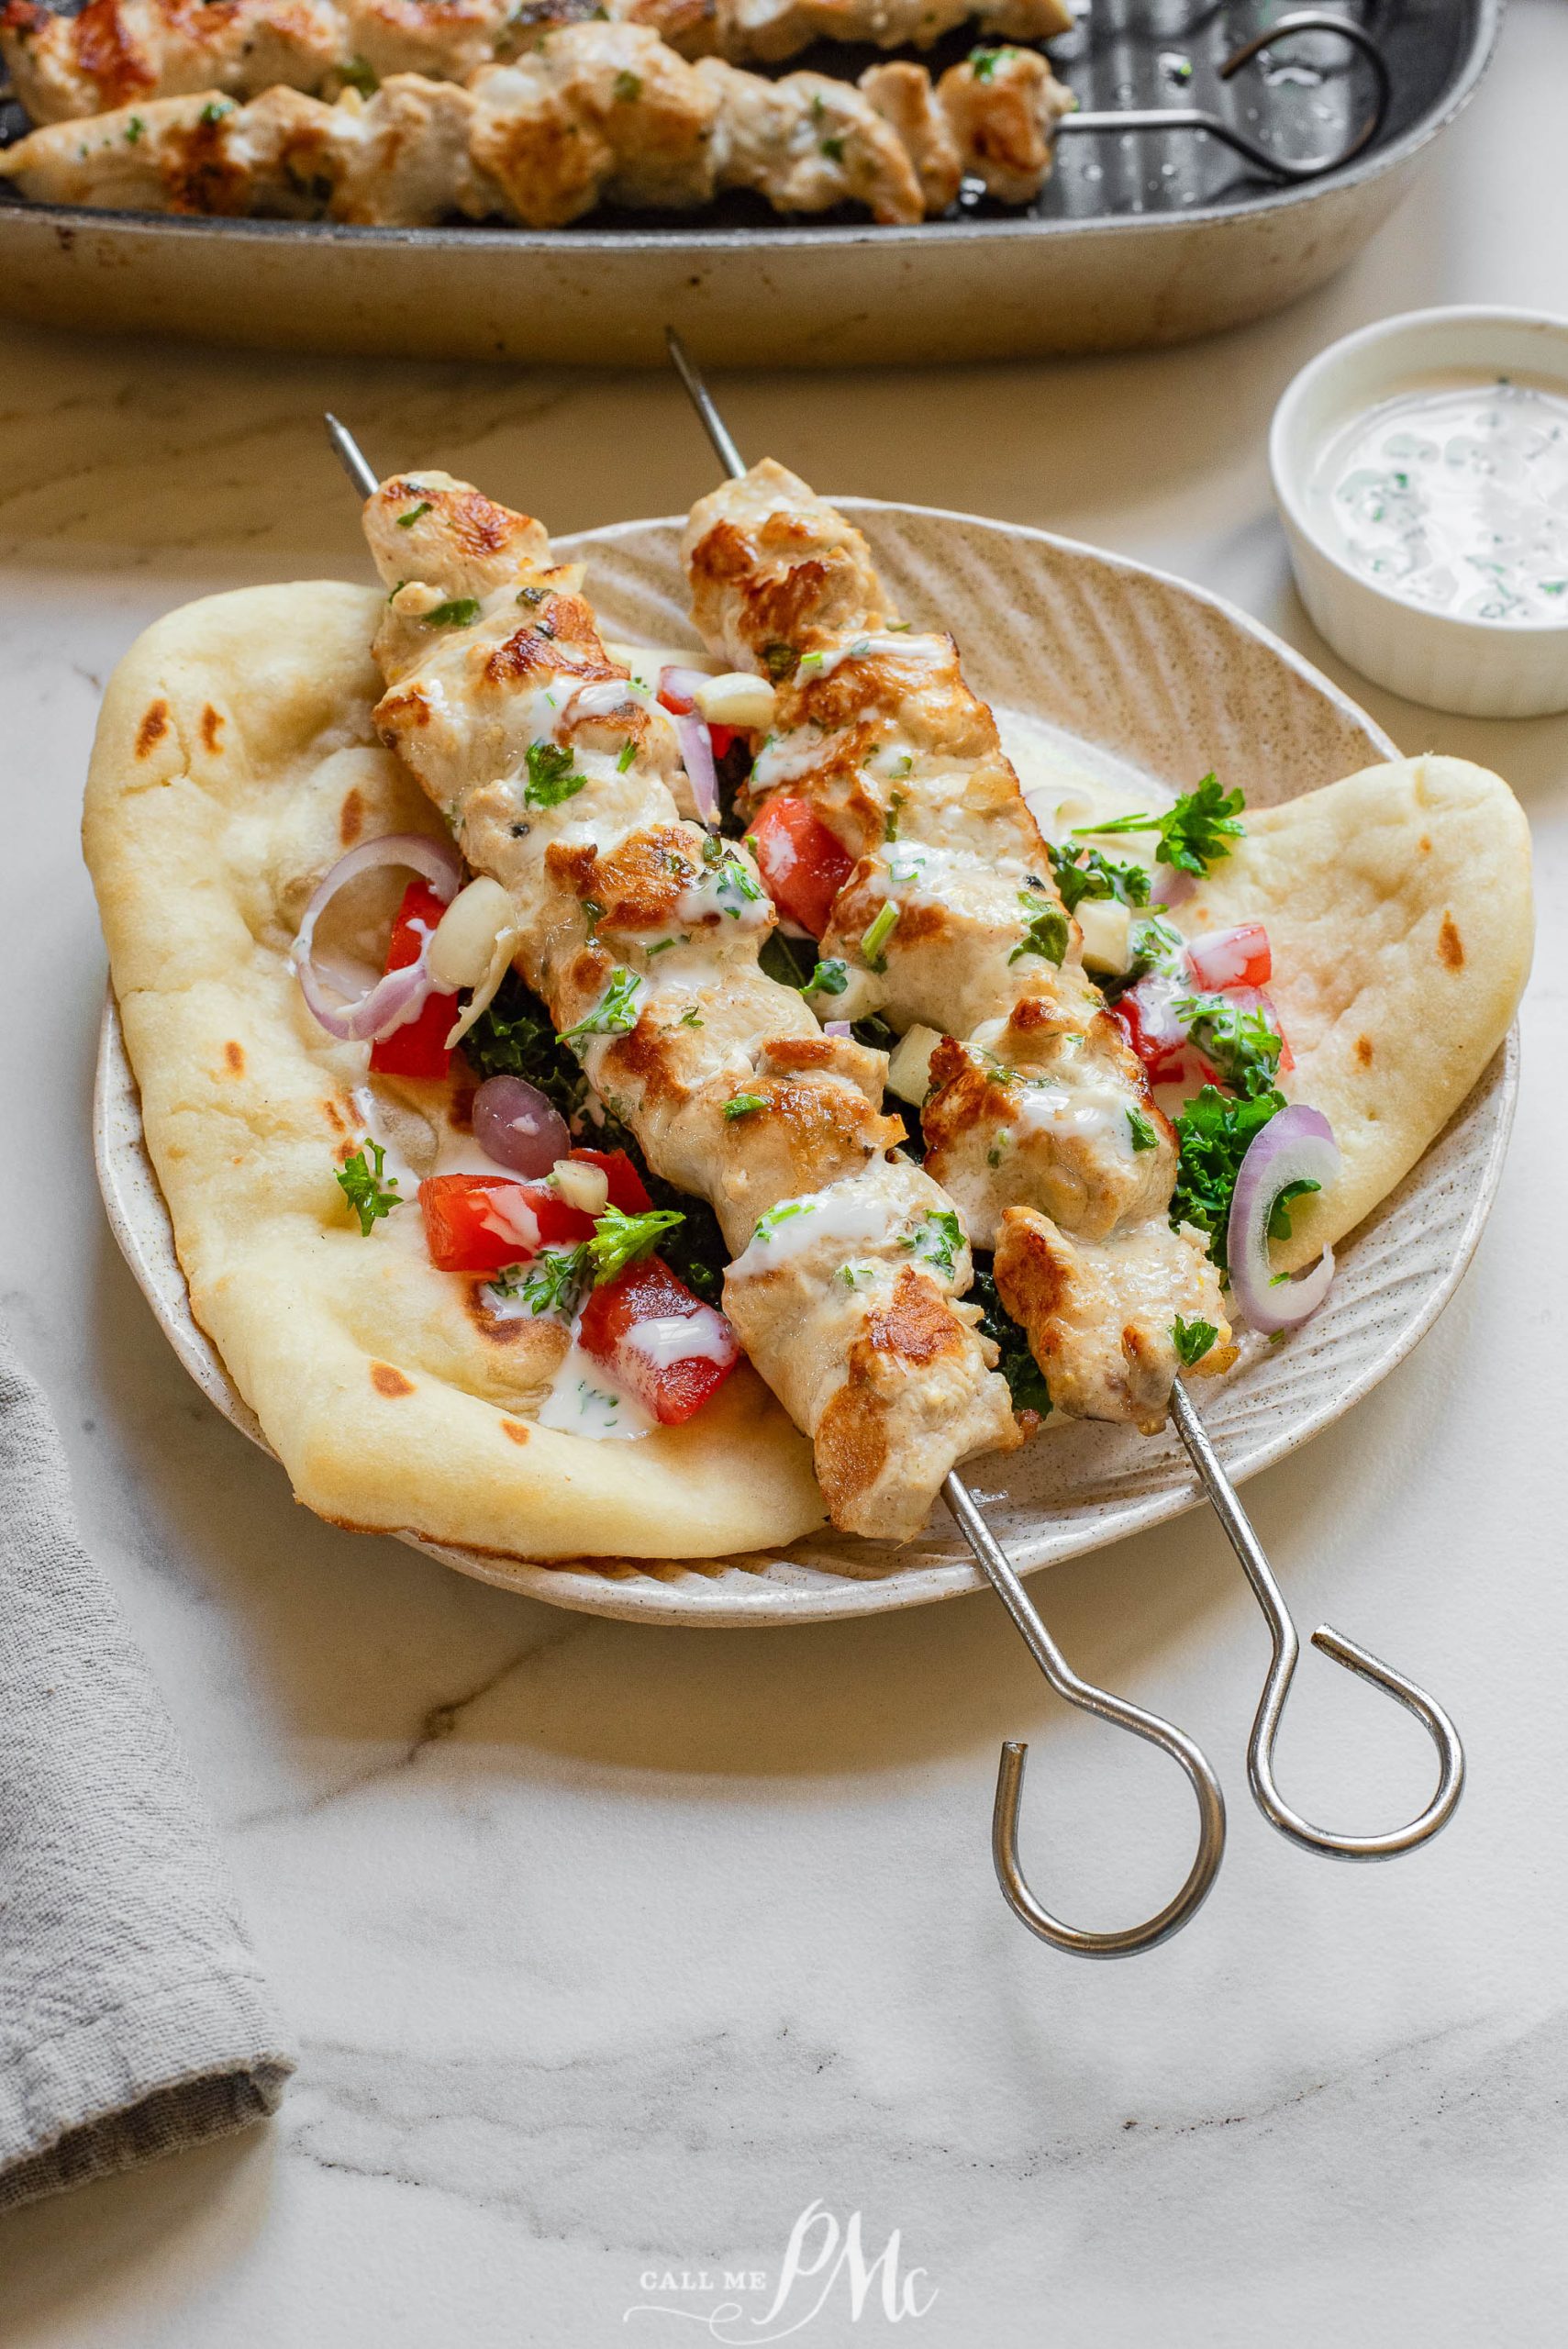 Chicken skewers on a plate with tzatziki sauce.